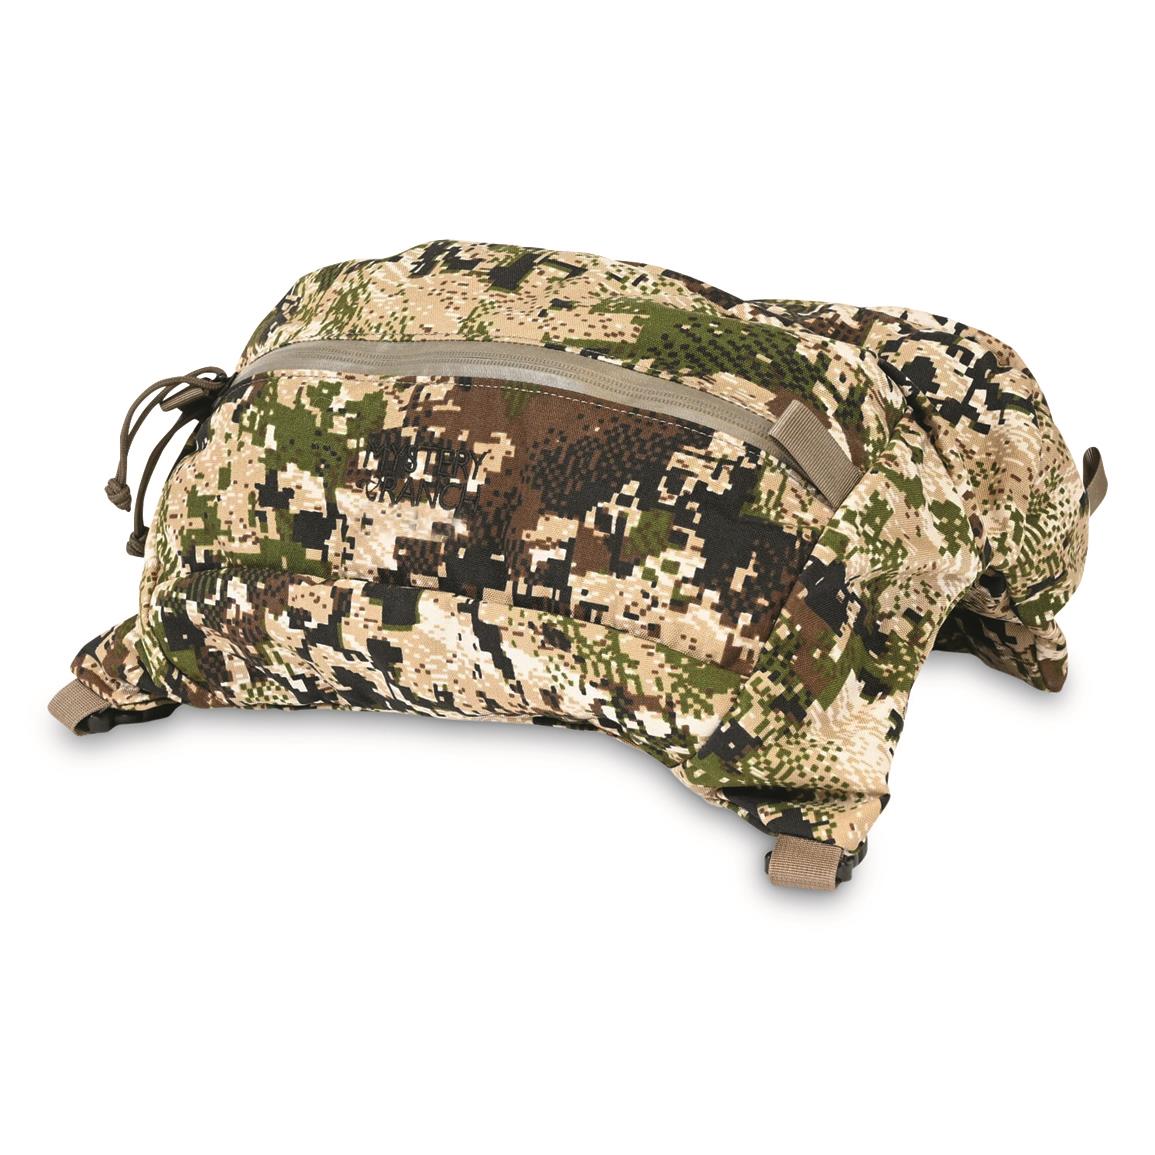 Mystery Ranch Hunting Daypack Lid, GORE OPTIFADE Subalpine, GORE™ OPTIFADE™ Subalpine